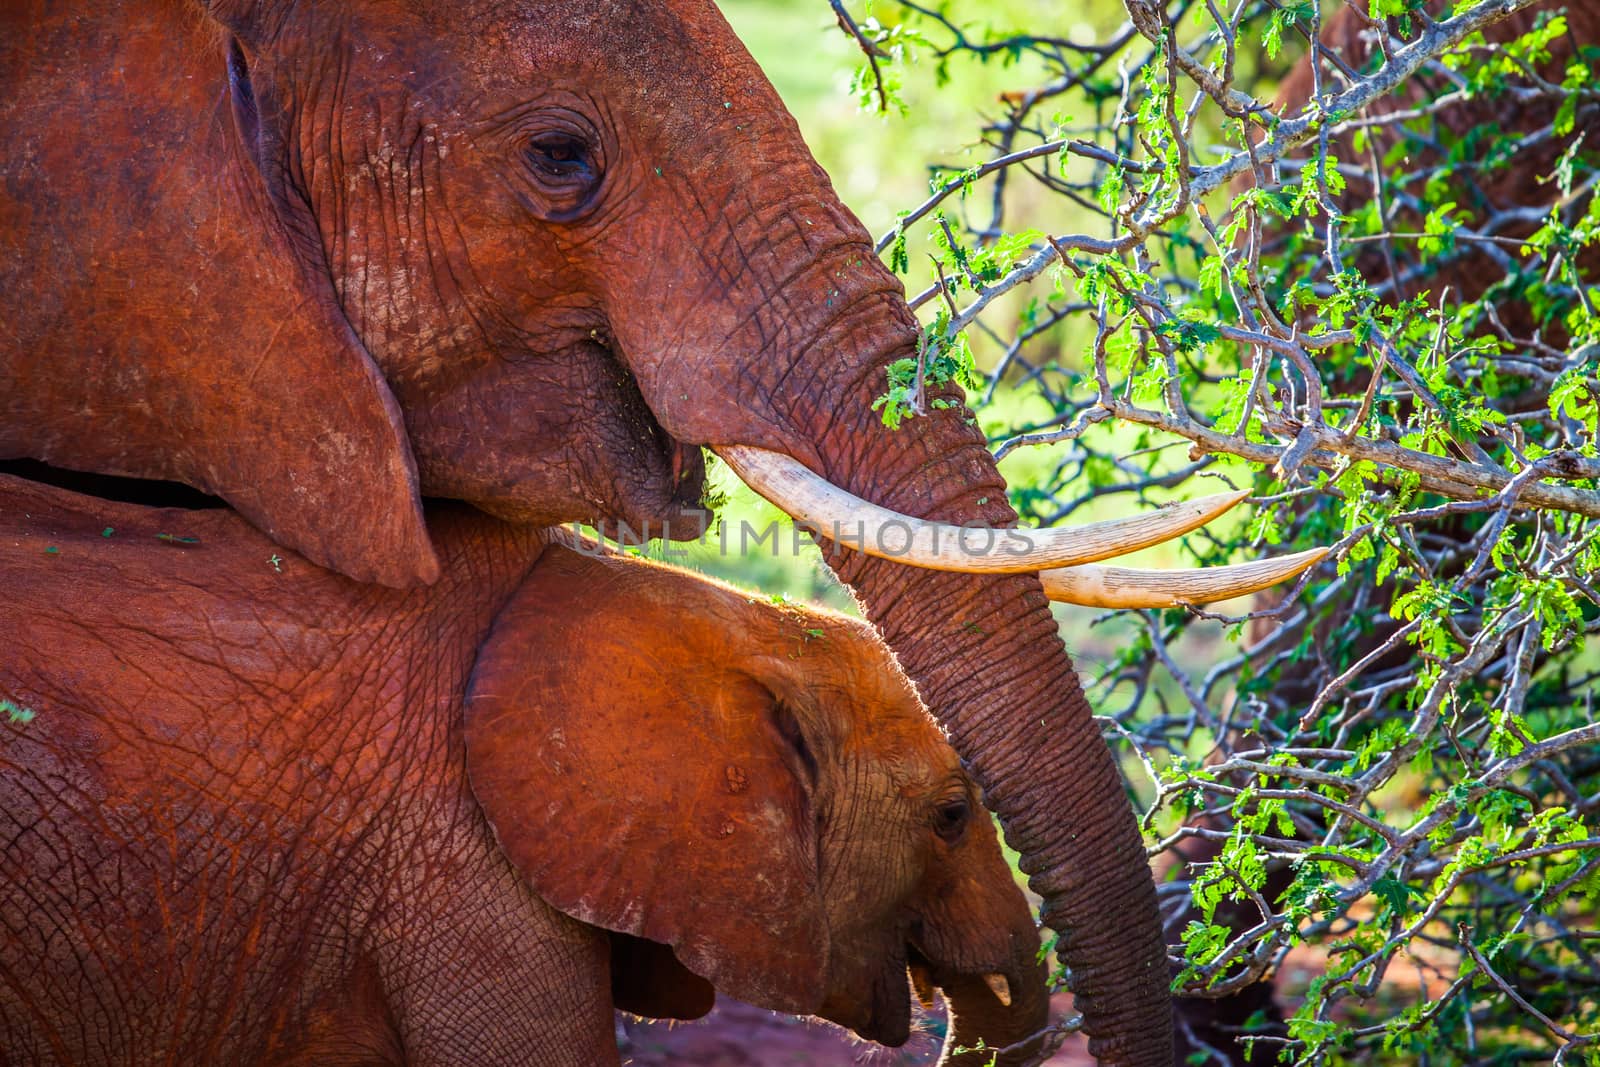 An elephant mom with her baby covered in red dust